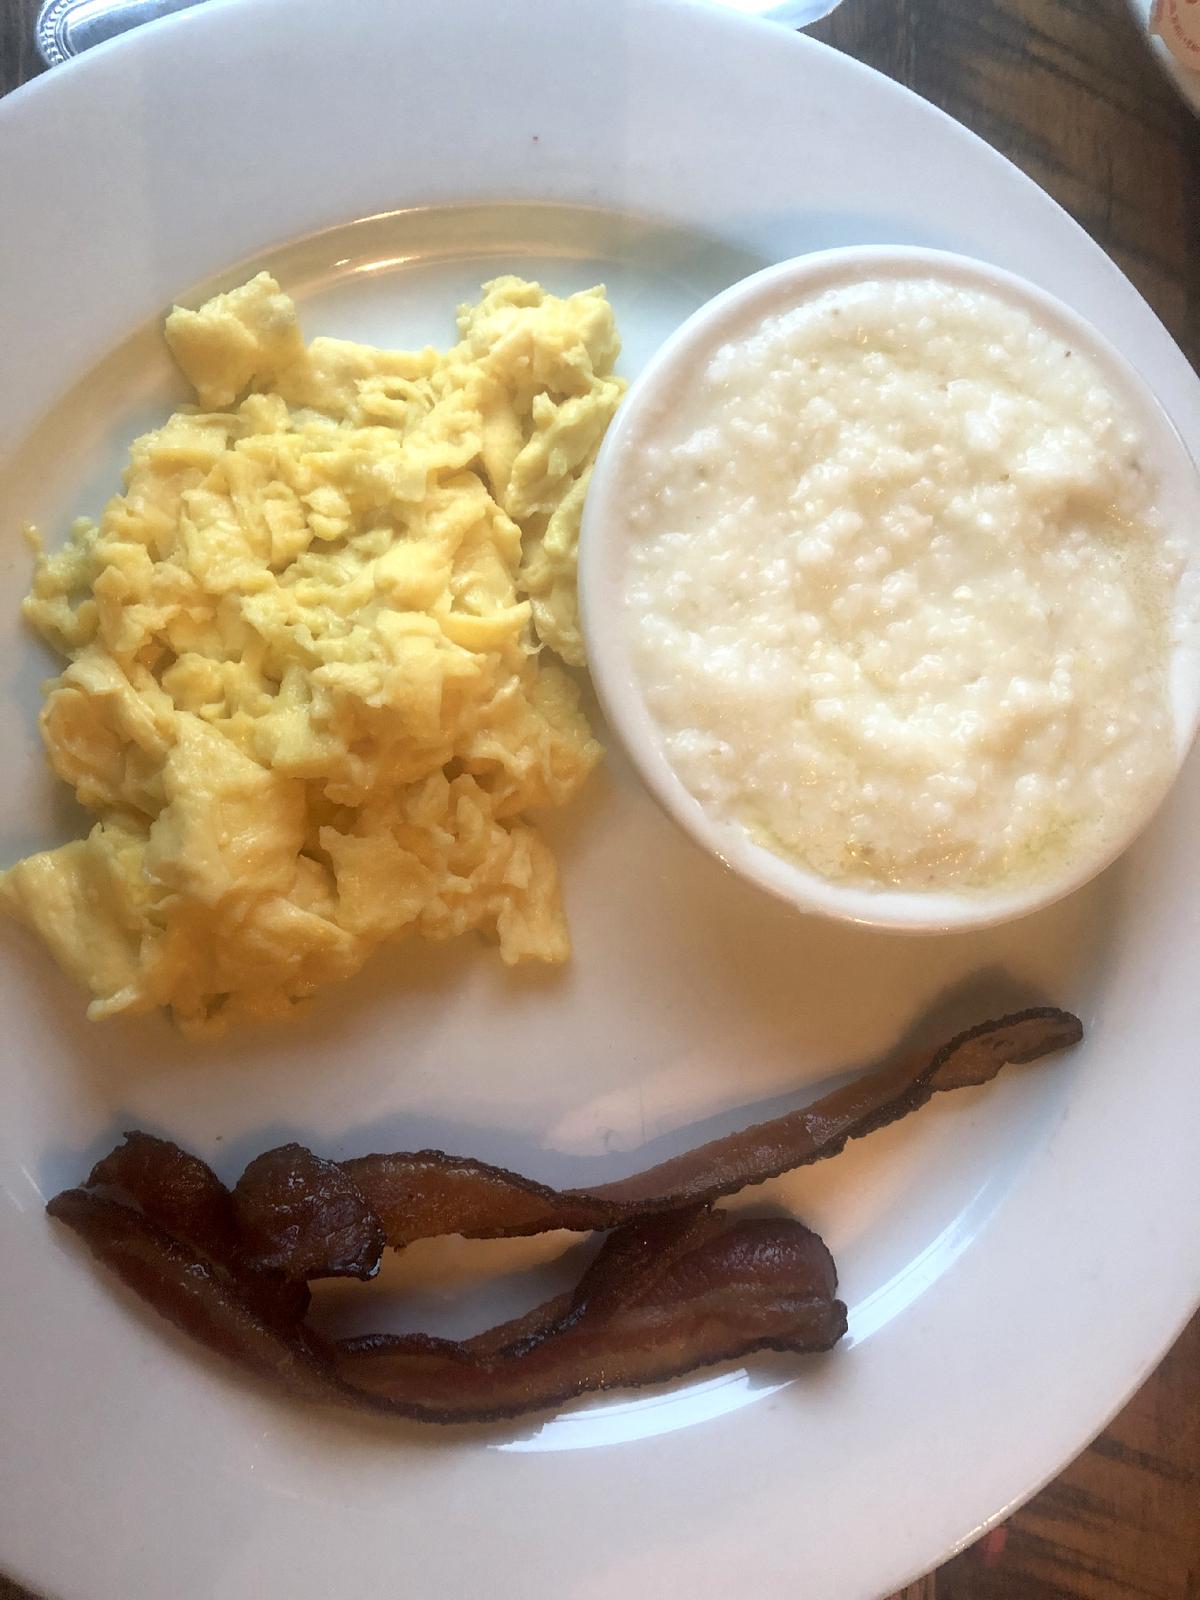 Crockett's Breakfast Camp in Gatlinburg provides gluten-free options as well as their meals that include pancakes and cinnamon rolls. (Courtesy of Bill Neely)